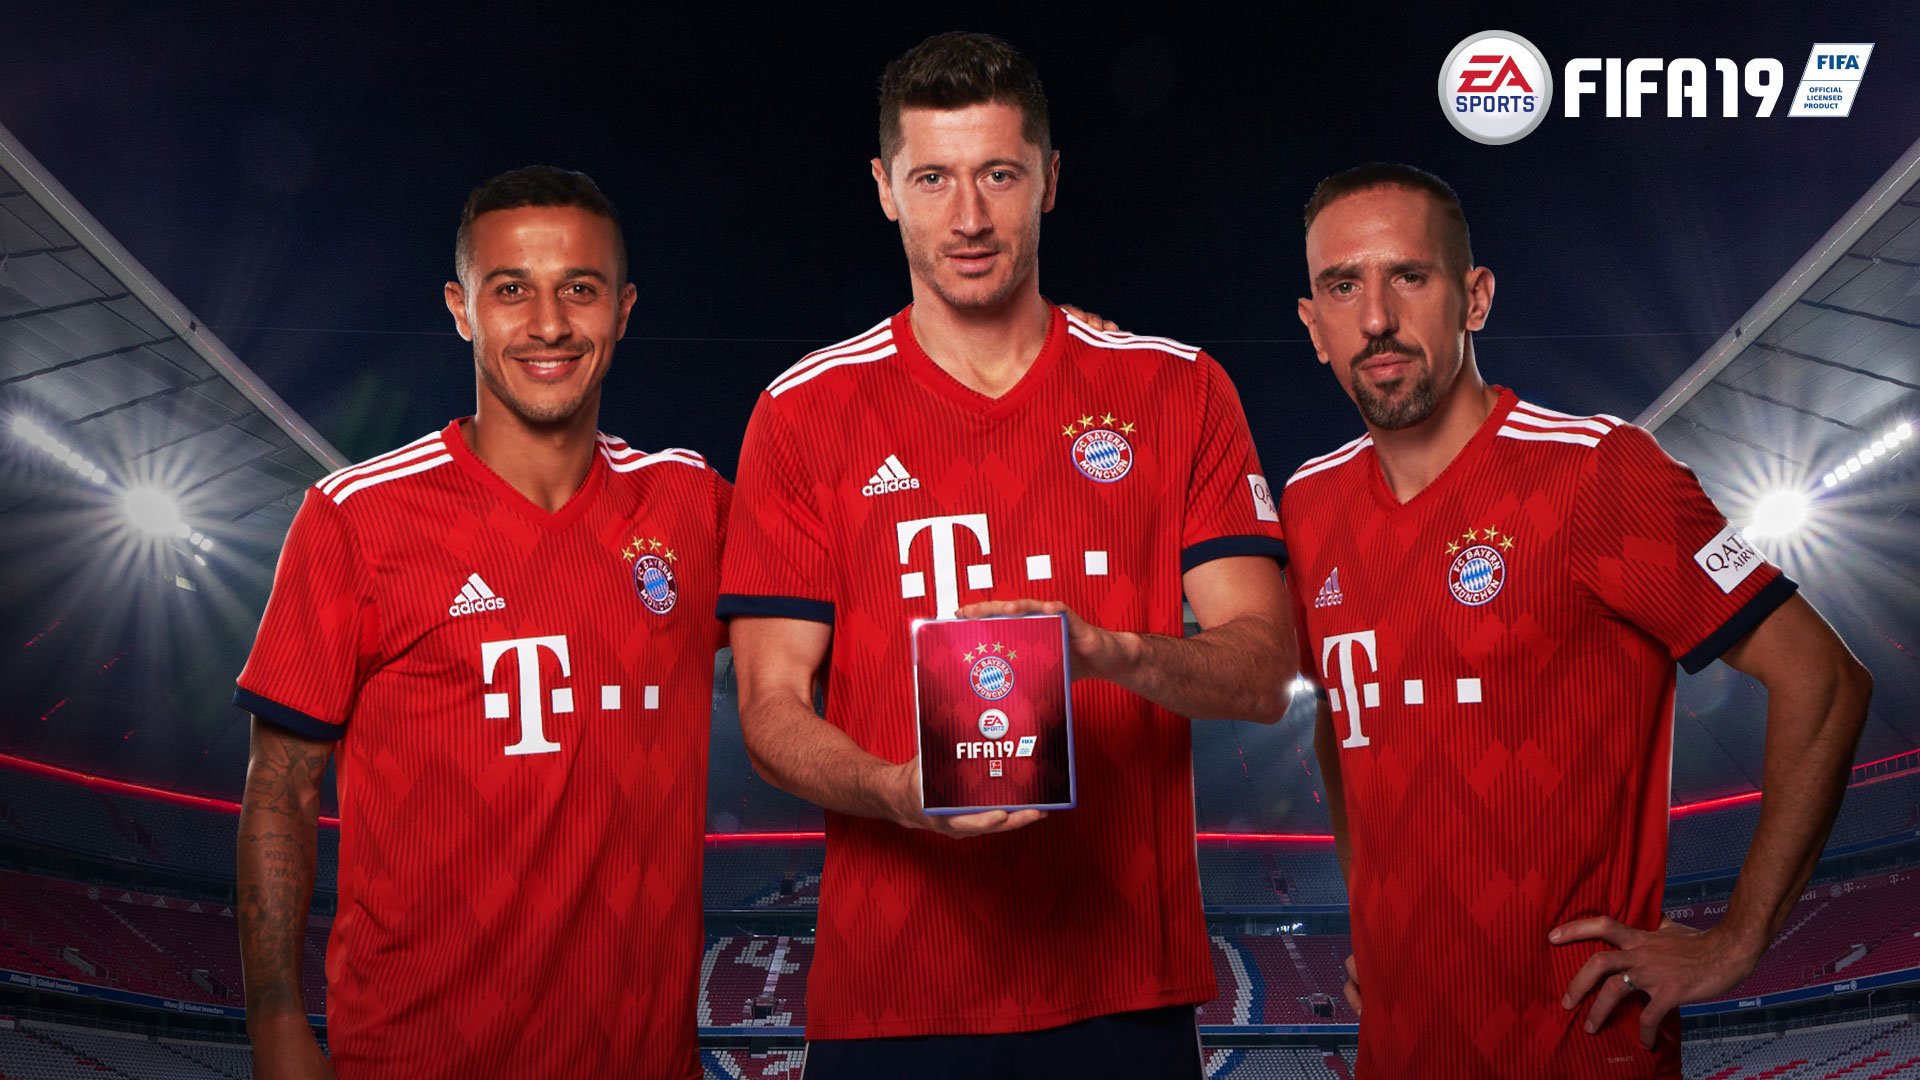 FIFA 19: Announced the limited edition designed by Bayern Munich - FifaUltimateTeam.it - UK